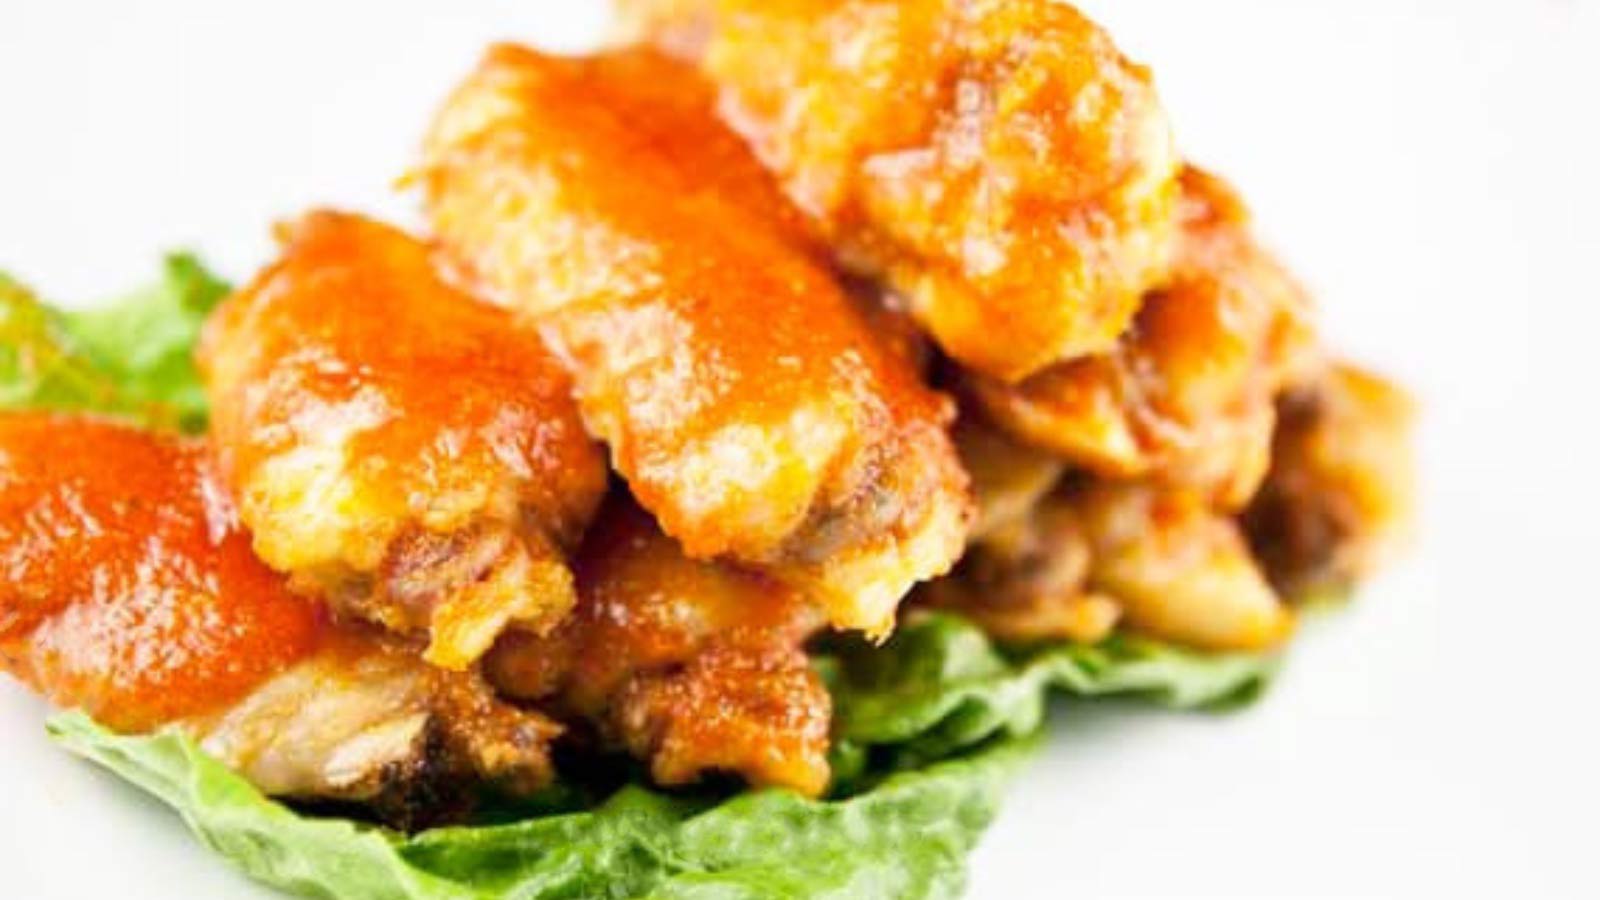 A stack of buffalo wings resting on lettuce.